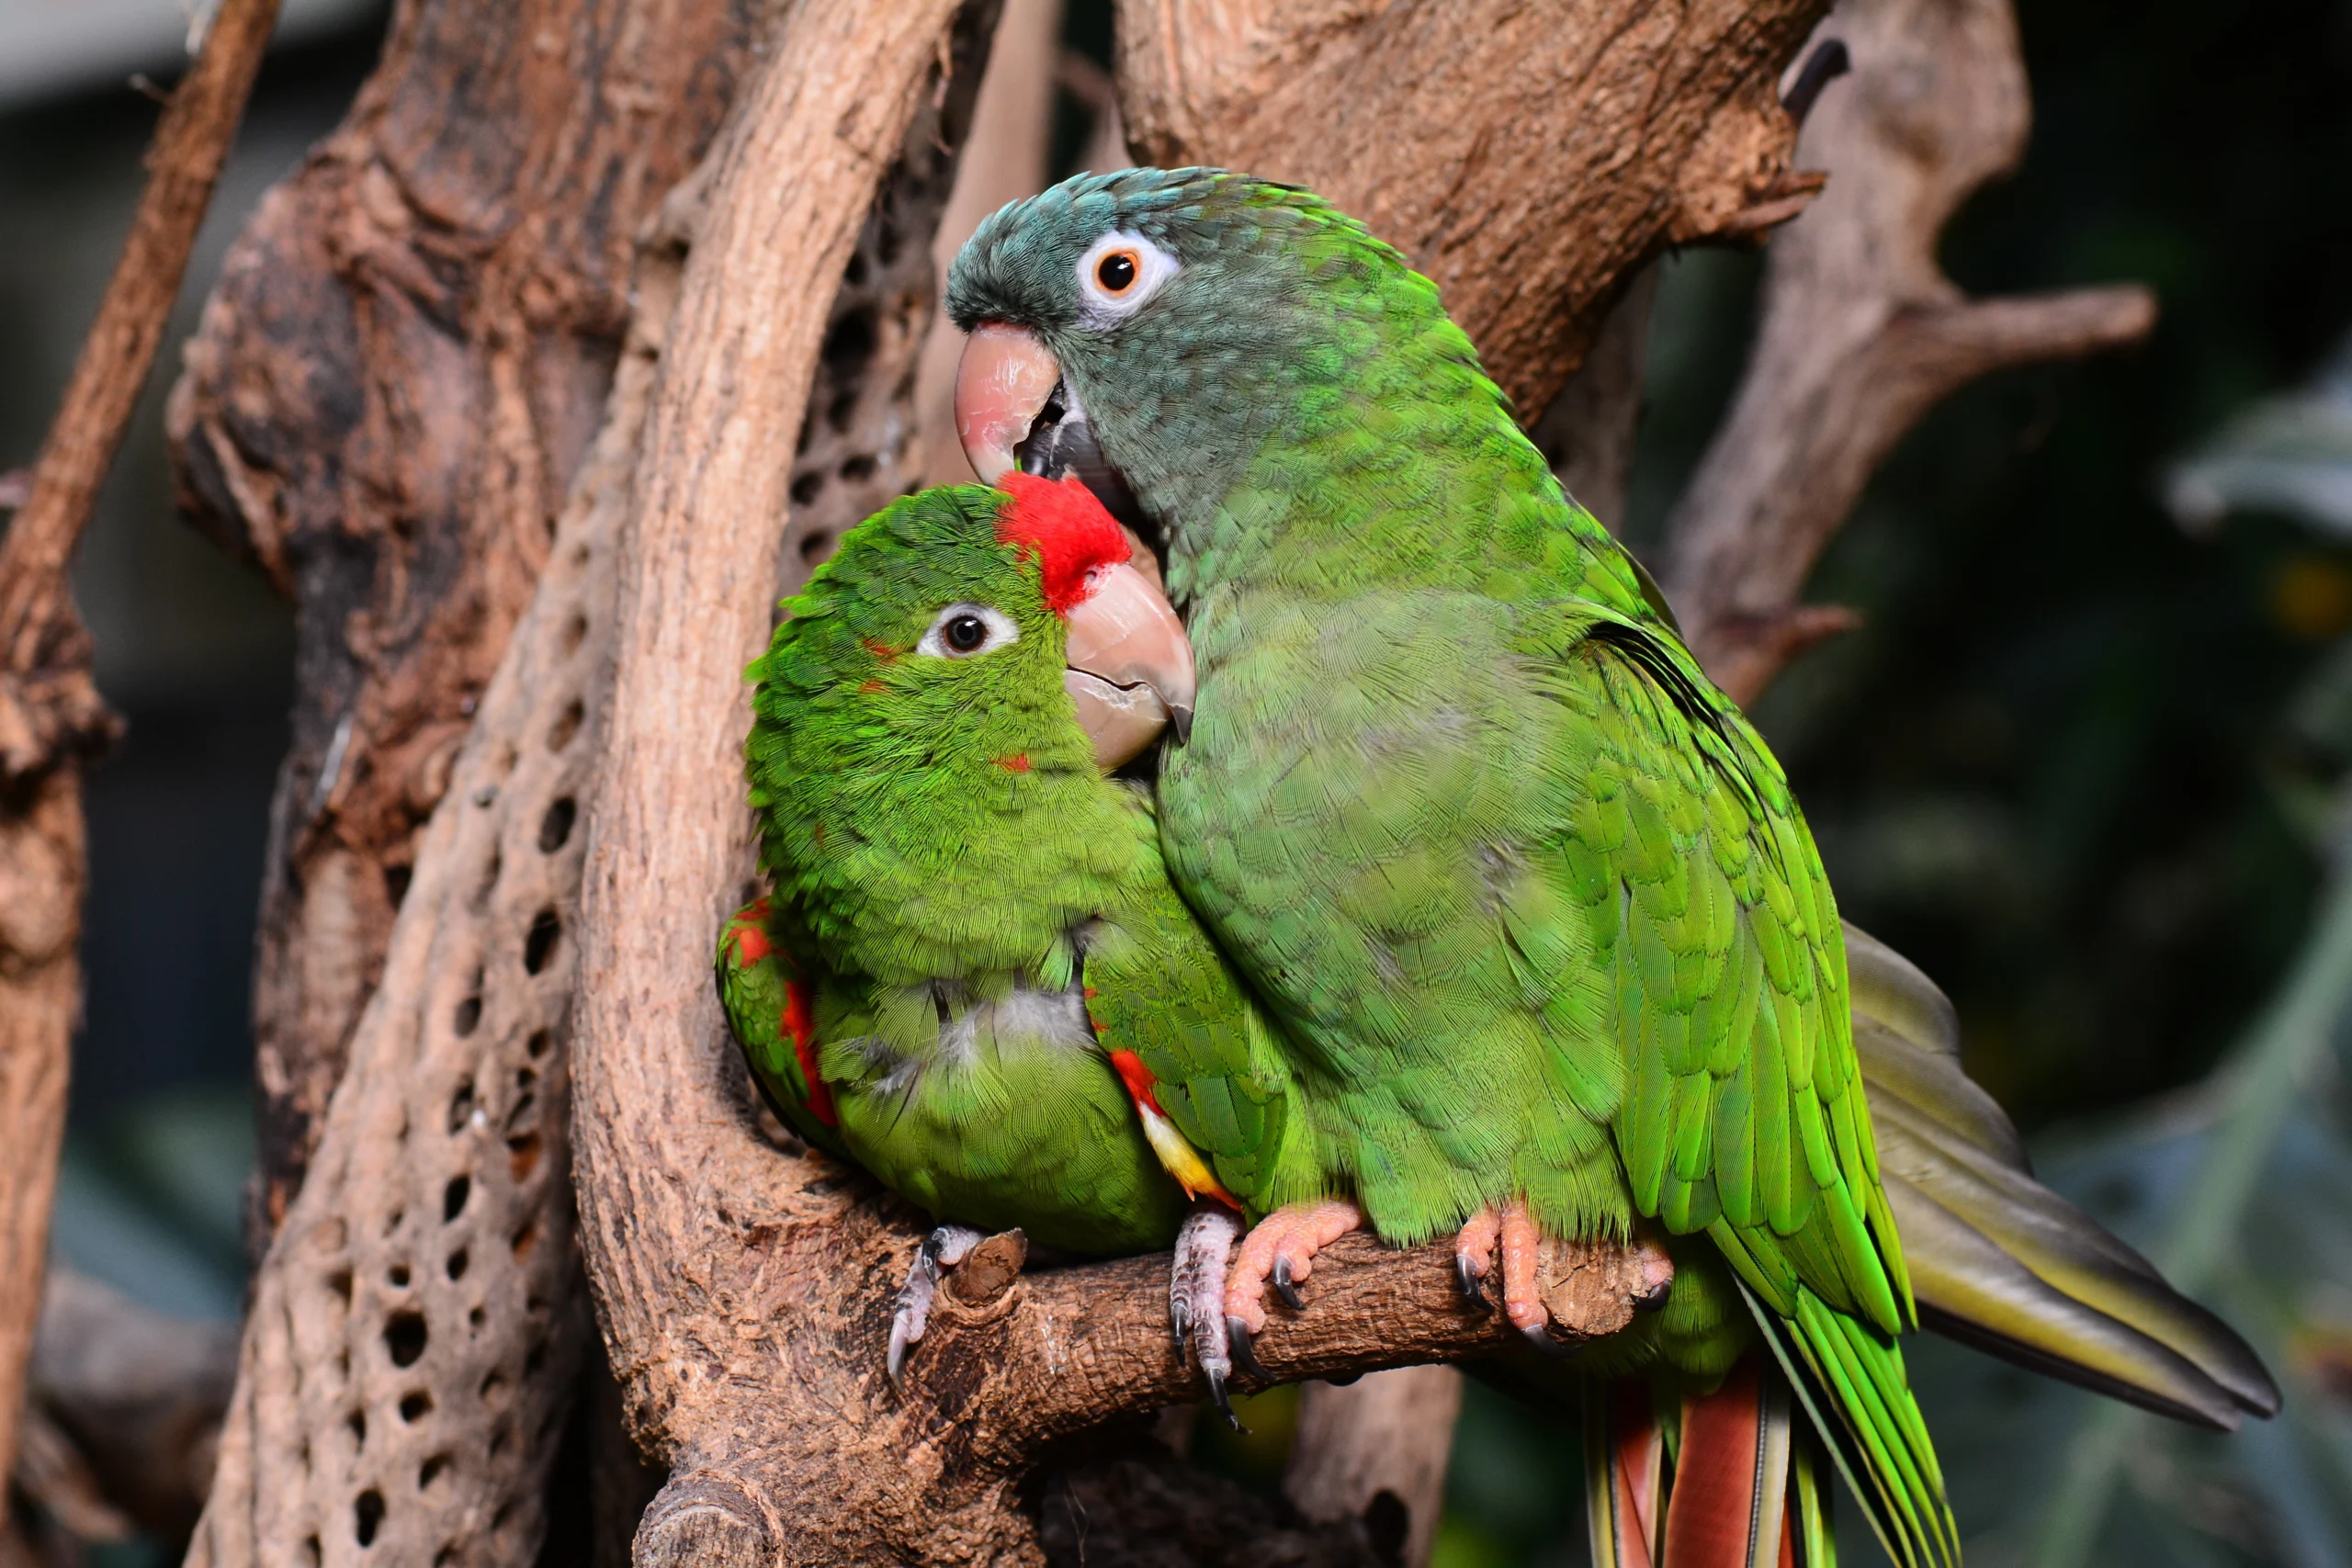 Can Lovebirds Be Outside in 50 Degrees?